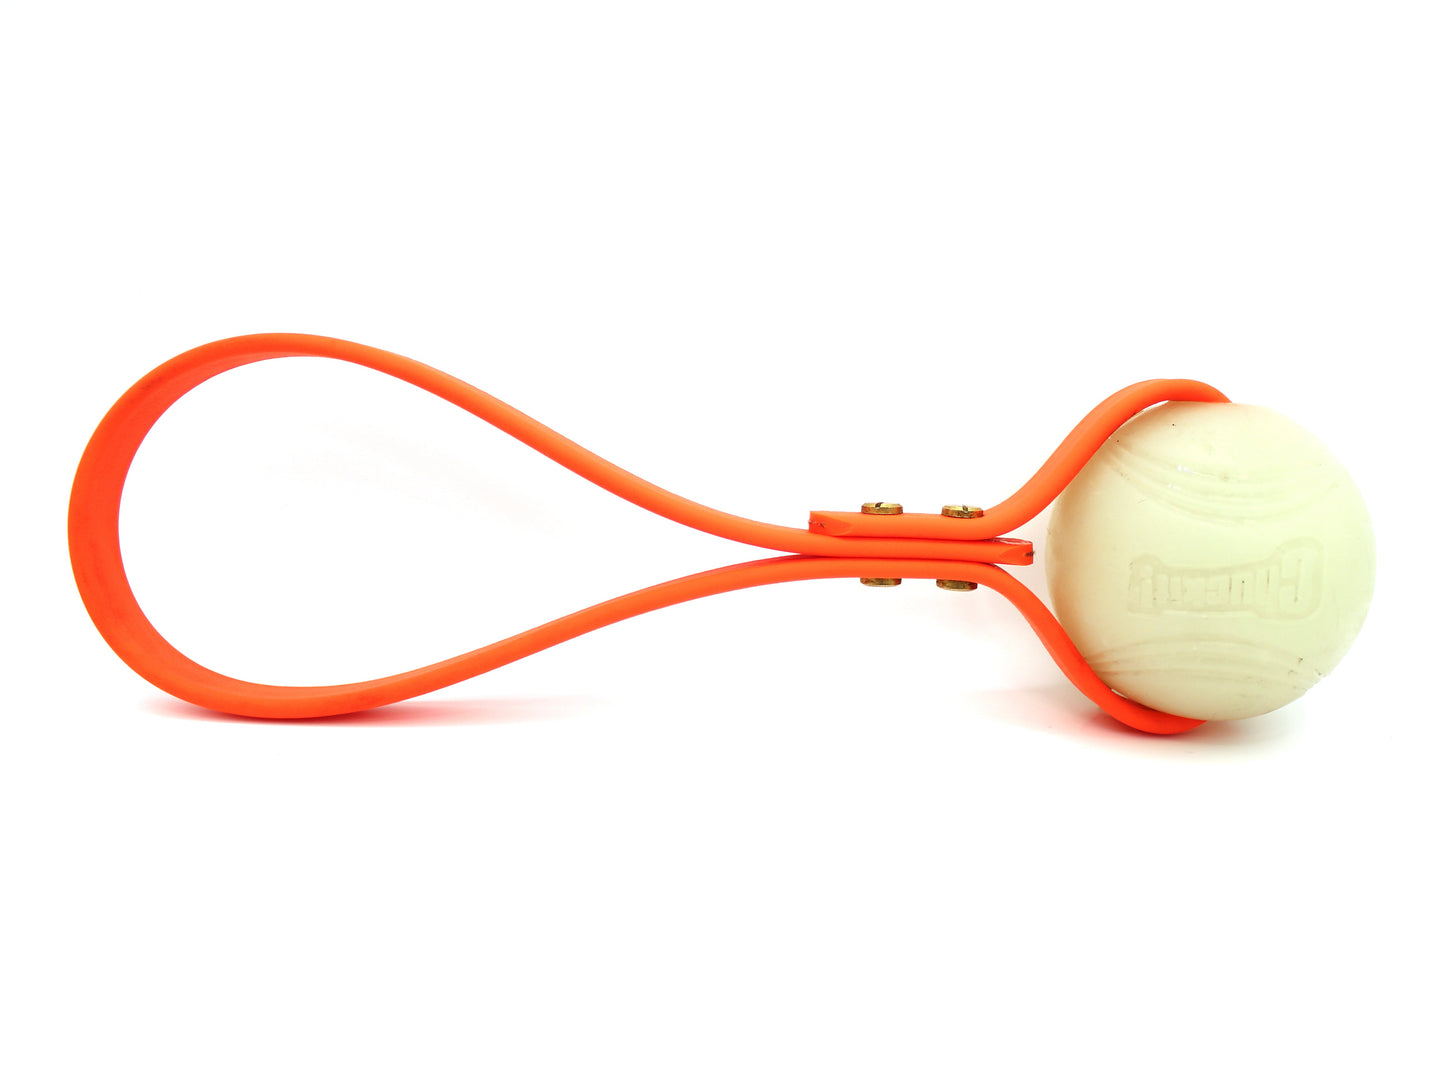 biothane ball tug, biothane ball, tug toy, ball tug toy,Chuckit, glow ball, rubber, reward, ball, toy, tug, handle, dog, BioThane USA, heavy duty, water proof, stink proof, long lasting, durable, leather alternative, easy to clean, fade proof. BQ Leashes, ball tug, heavy duty, chew king ball, chuckit ball, dog reward, dog toy, biothane, obedience reward, dog training